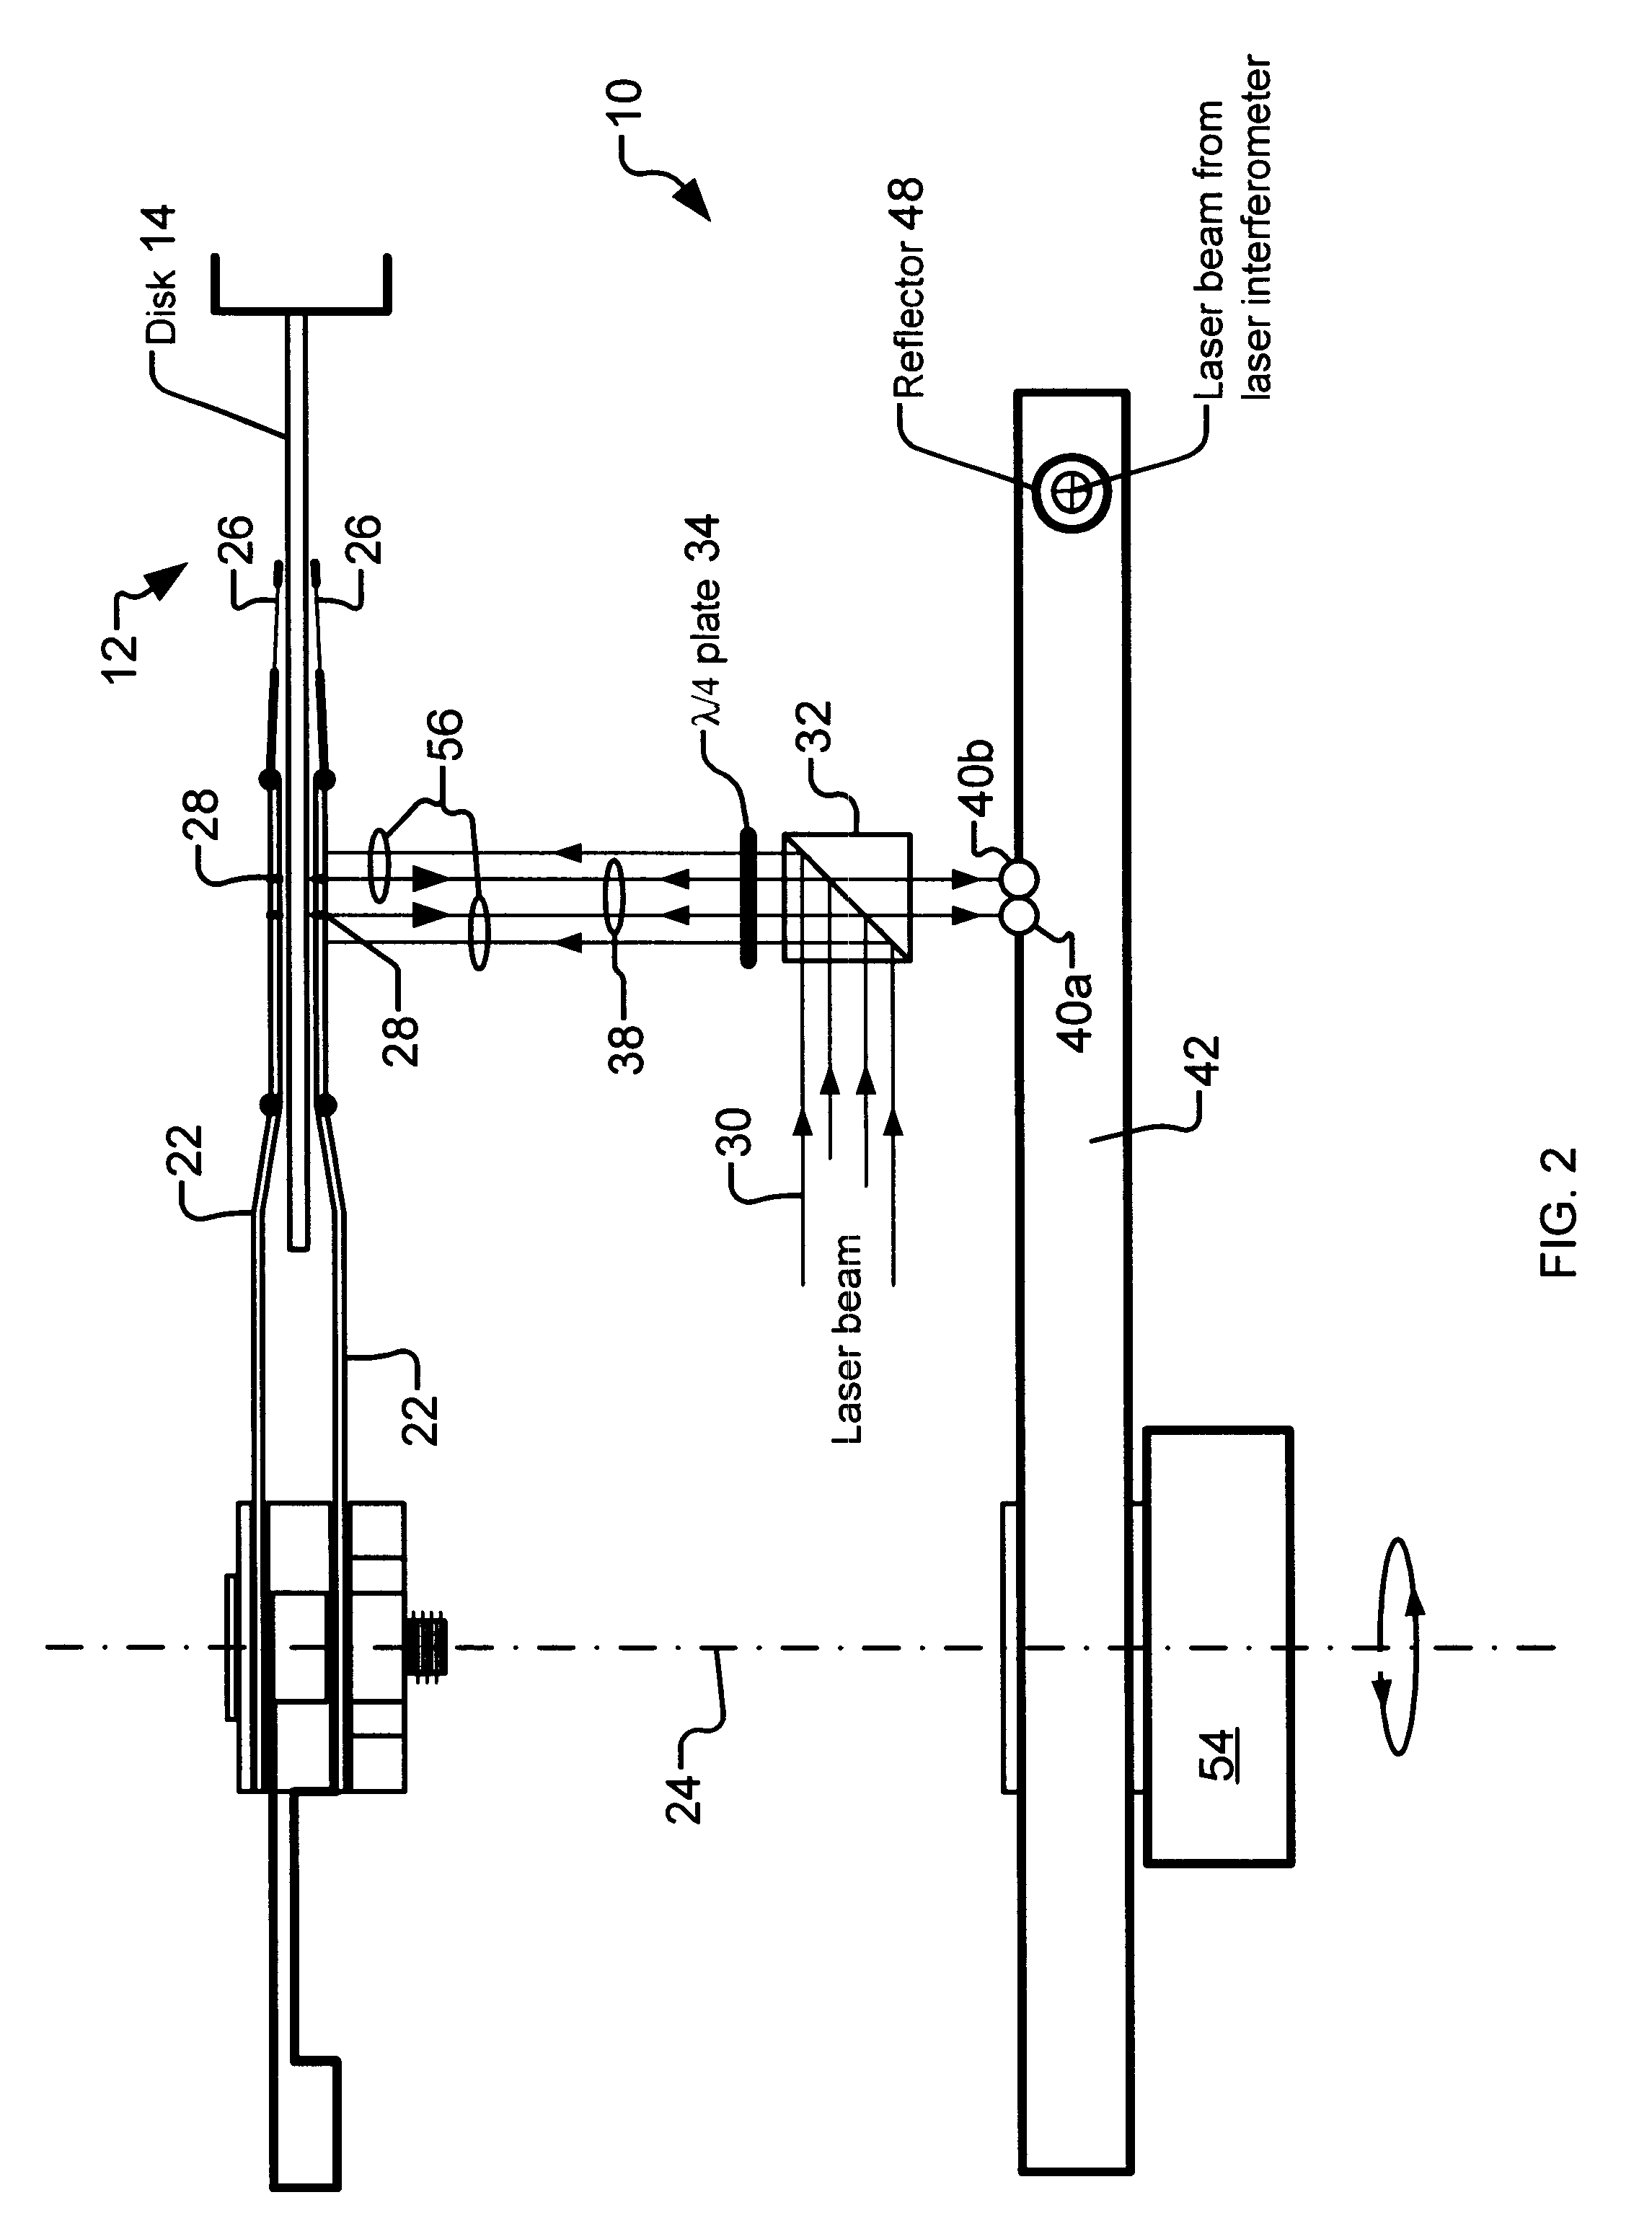 Non-contact servo track writing apparatus and method